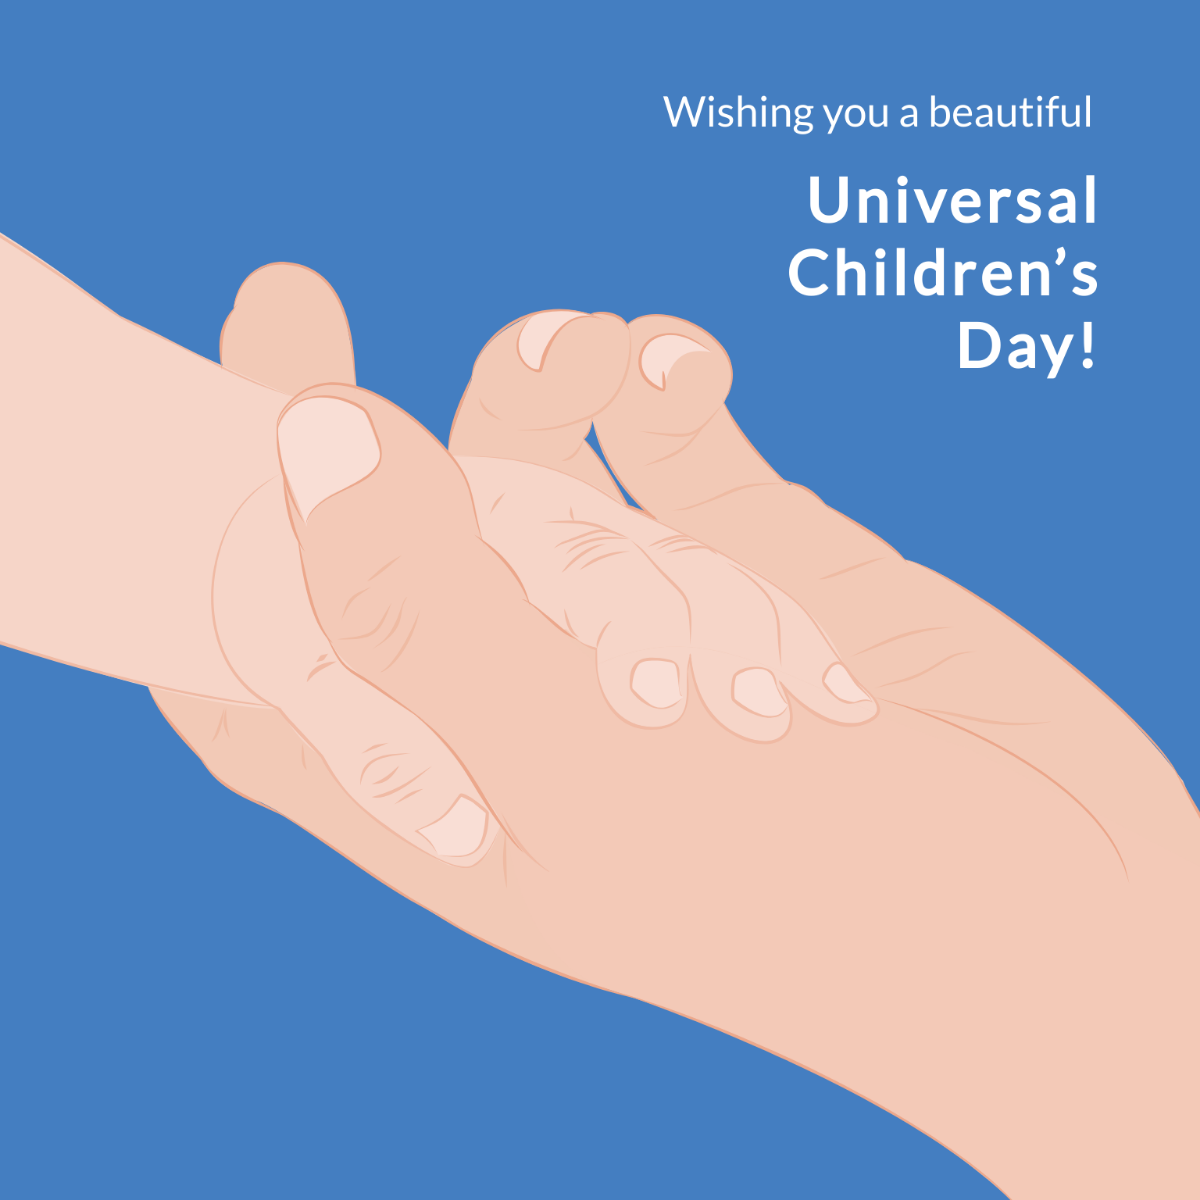 Free Universal Children’s Day Wishes Vector Template